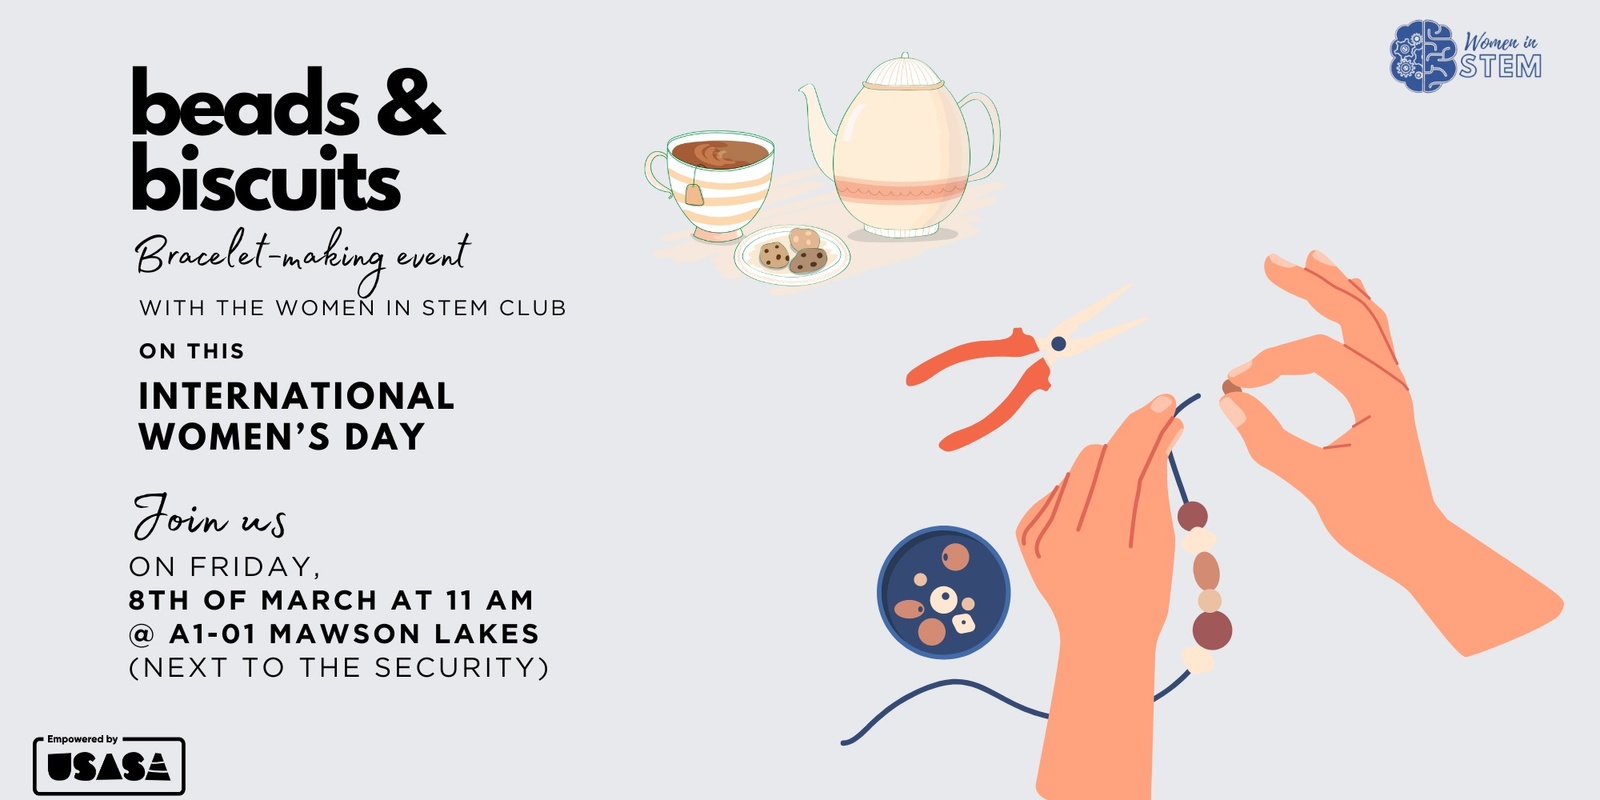 Banner image for Beads & Biscuits - Bracelet-making event